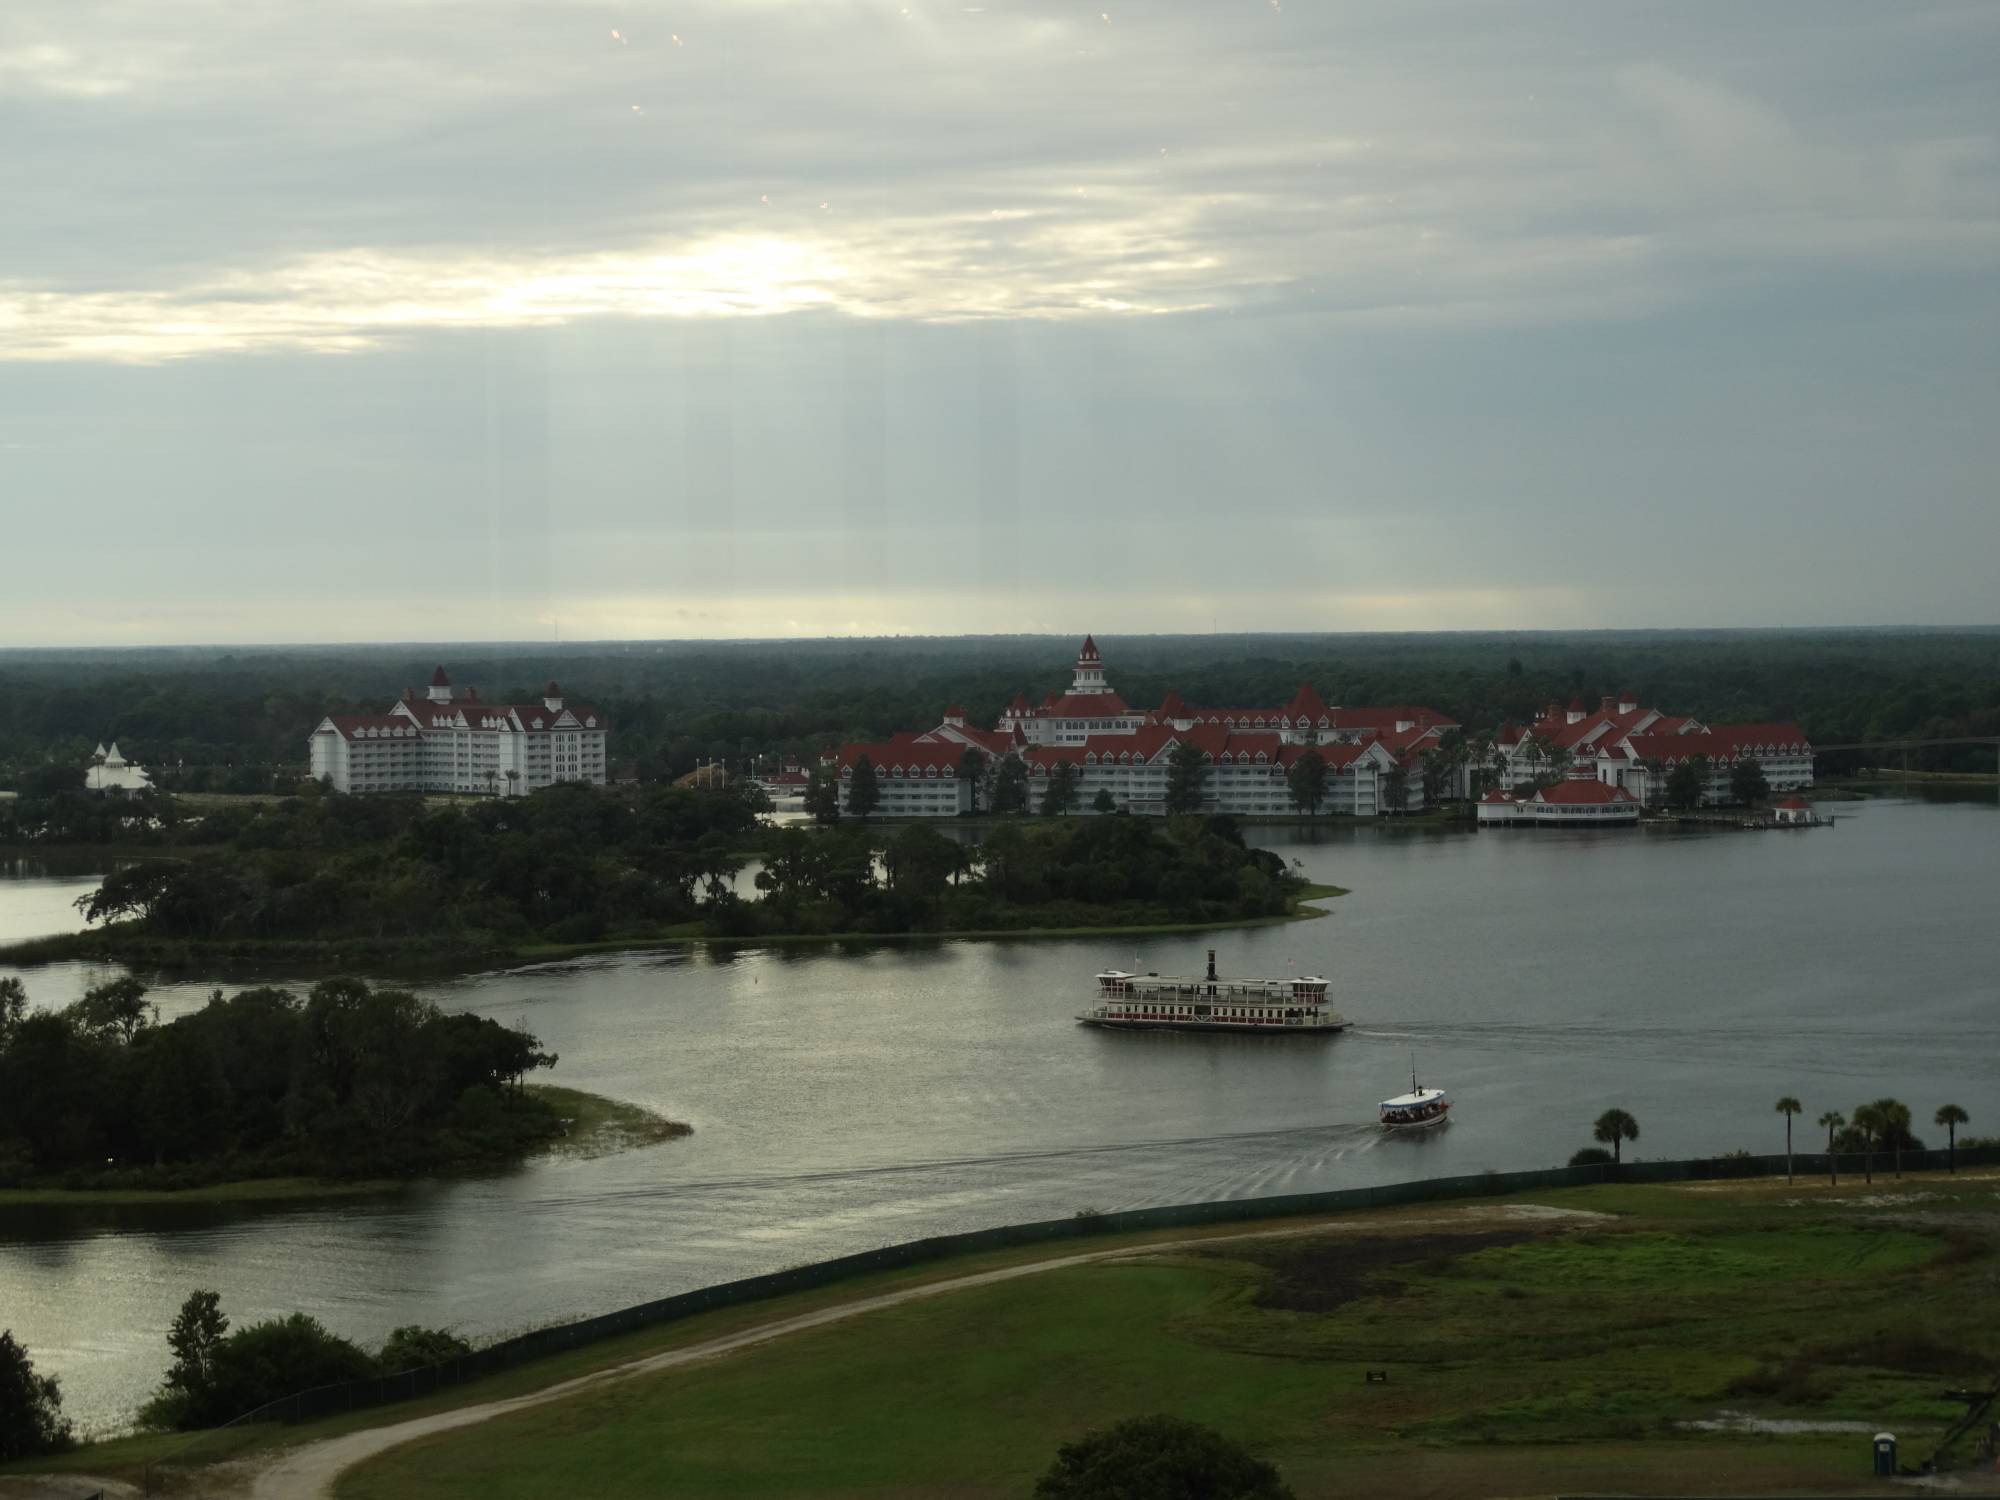 Grand Floridian - from the Contemporary